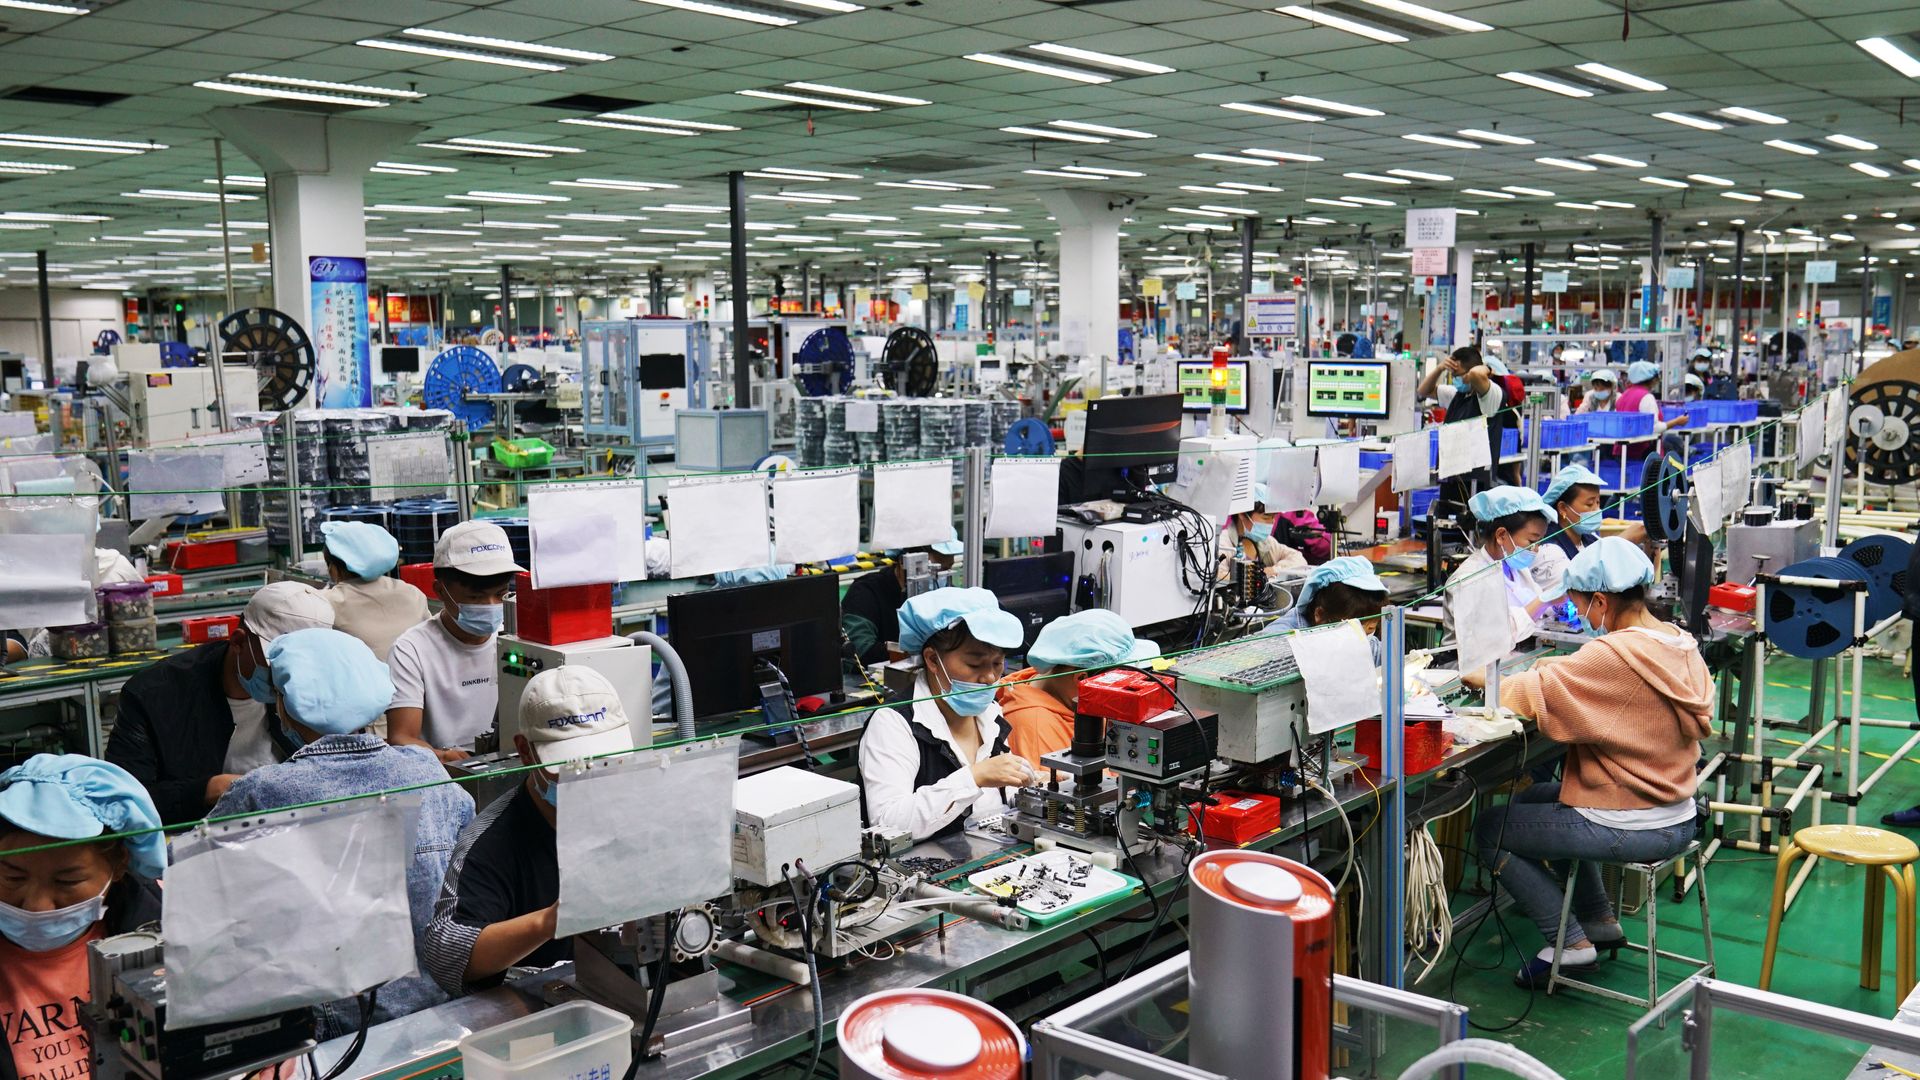 The broken manufacturing system in China is causing disruptions in its employment sector, resulting in record-high unemployment rates.